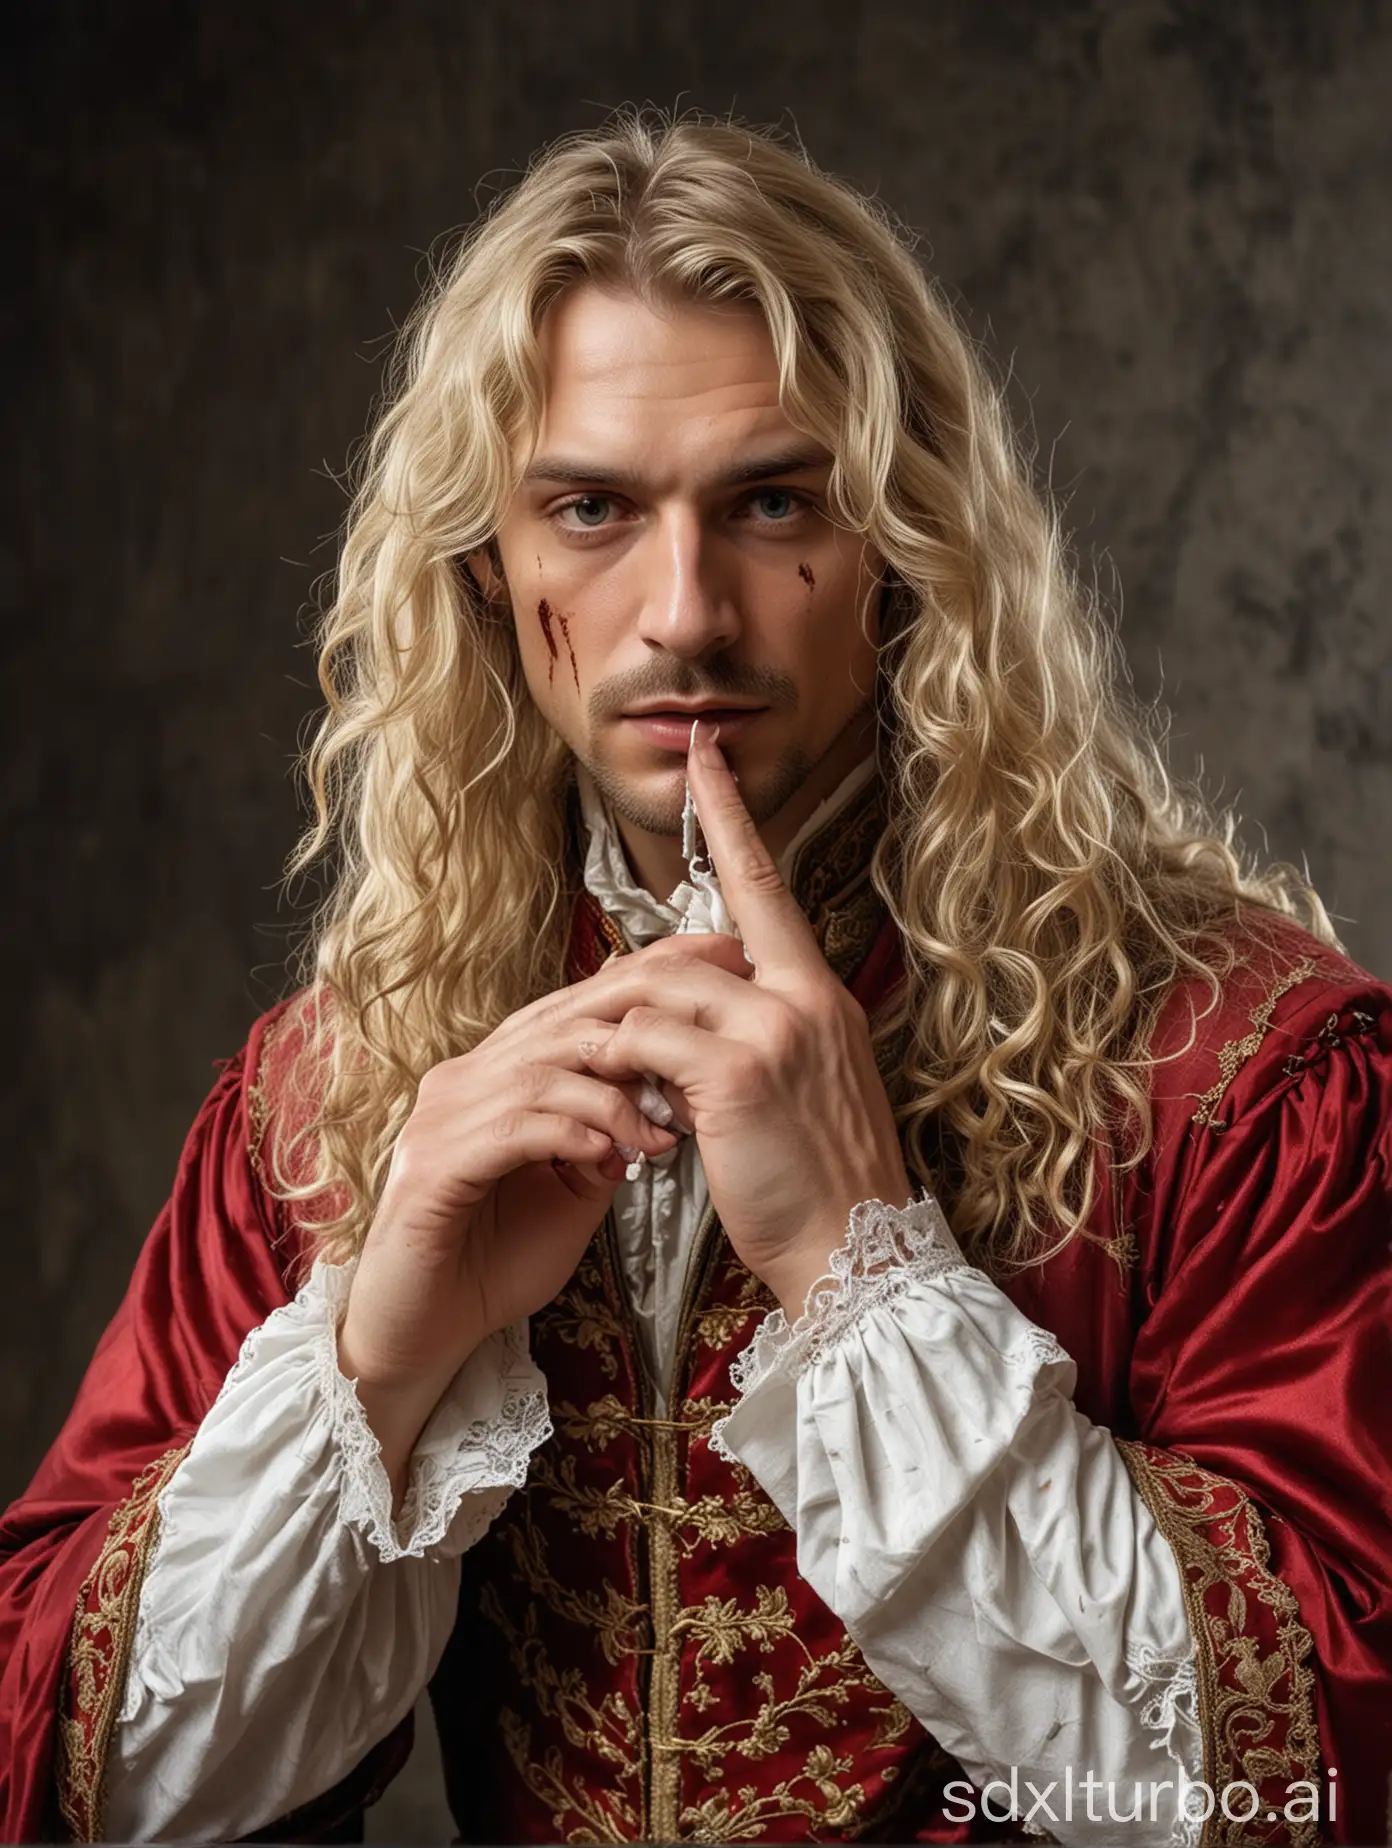 A handsome man of about thirty-five with long wavy blond hair in a rich medieval costume stands in half turn full figure view  with his hand in front of his face, wipes the blood from his face with a lace bloodstained handkerchief and his head held up so that his nose does not bleed. 